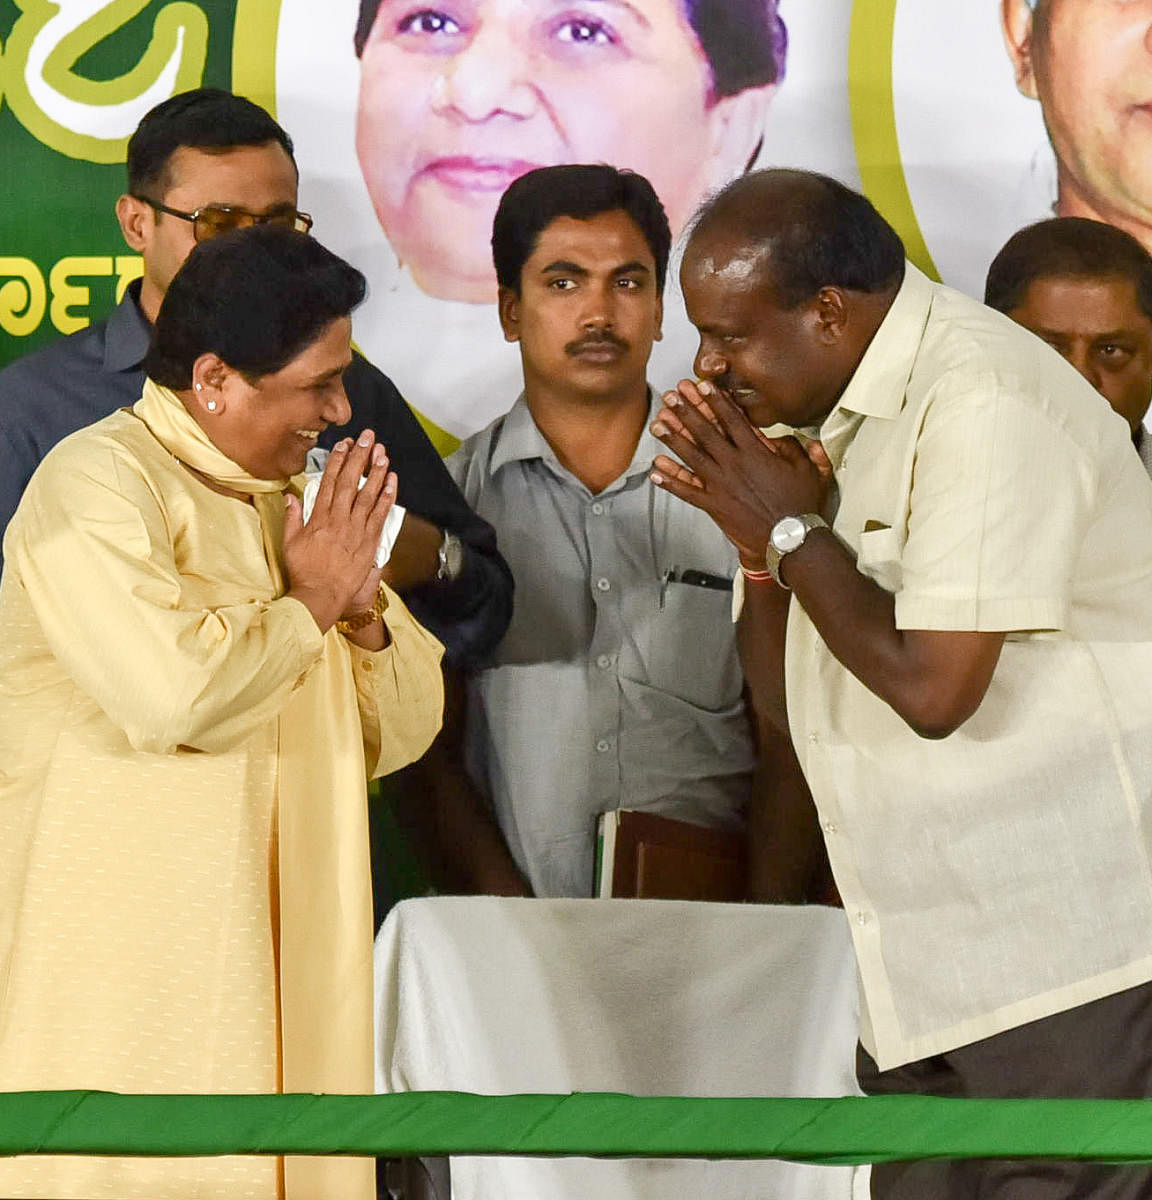 BSP National President Mayawati and JD(S) State President H D Kumarswamy exchanging greeting during the 'Kumara Parva', jointly organised by JS(D) and BSP at Maharaja College Ground in Mysuru on Wednesday.-Photo by Savitha. B R